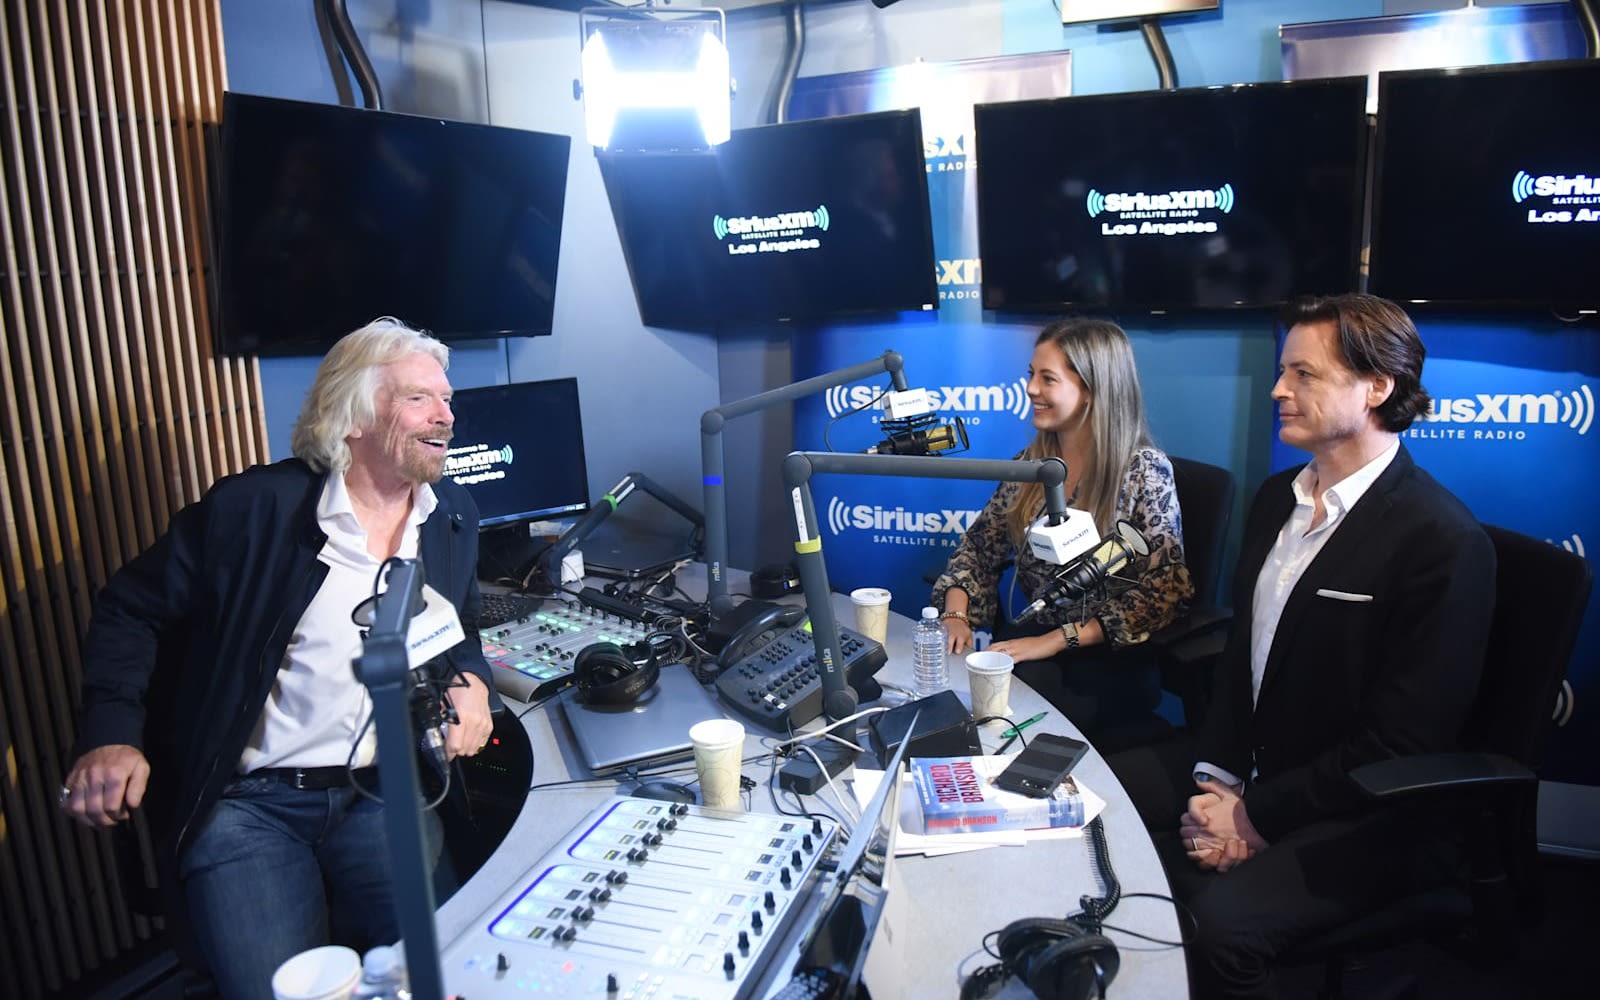 Richard Branson on his Sirius XM show with  Milana Rabkin  and John Fugelsang in the studio